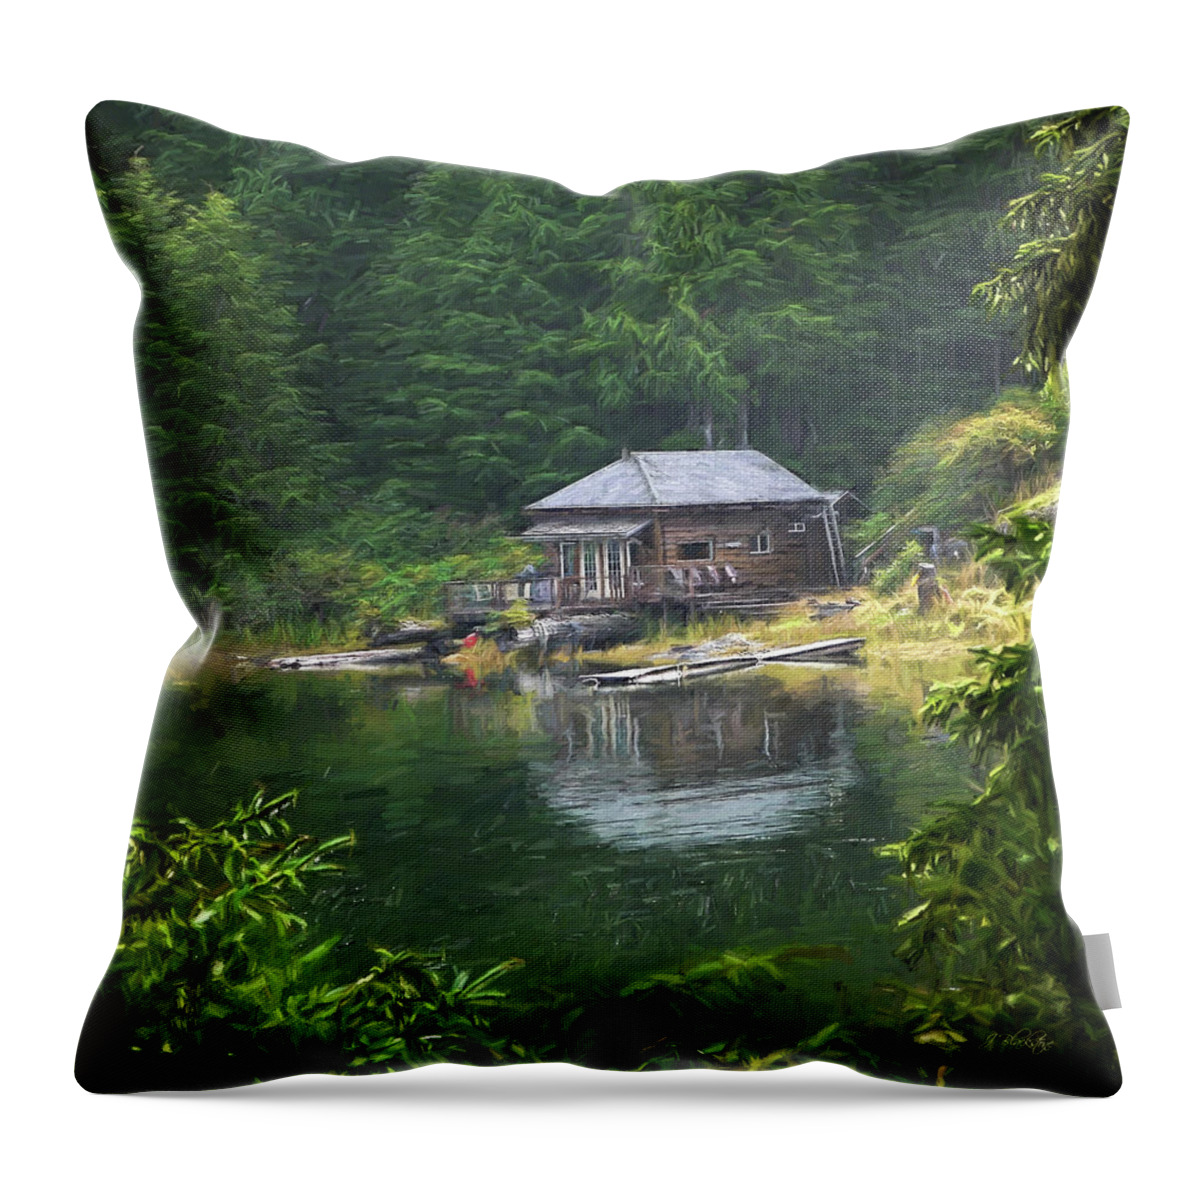 Home Is Where Throw Pillow featuring the painting Home Is Where by Jordan Blackstone